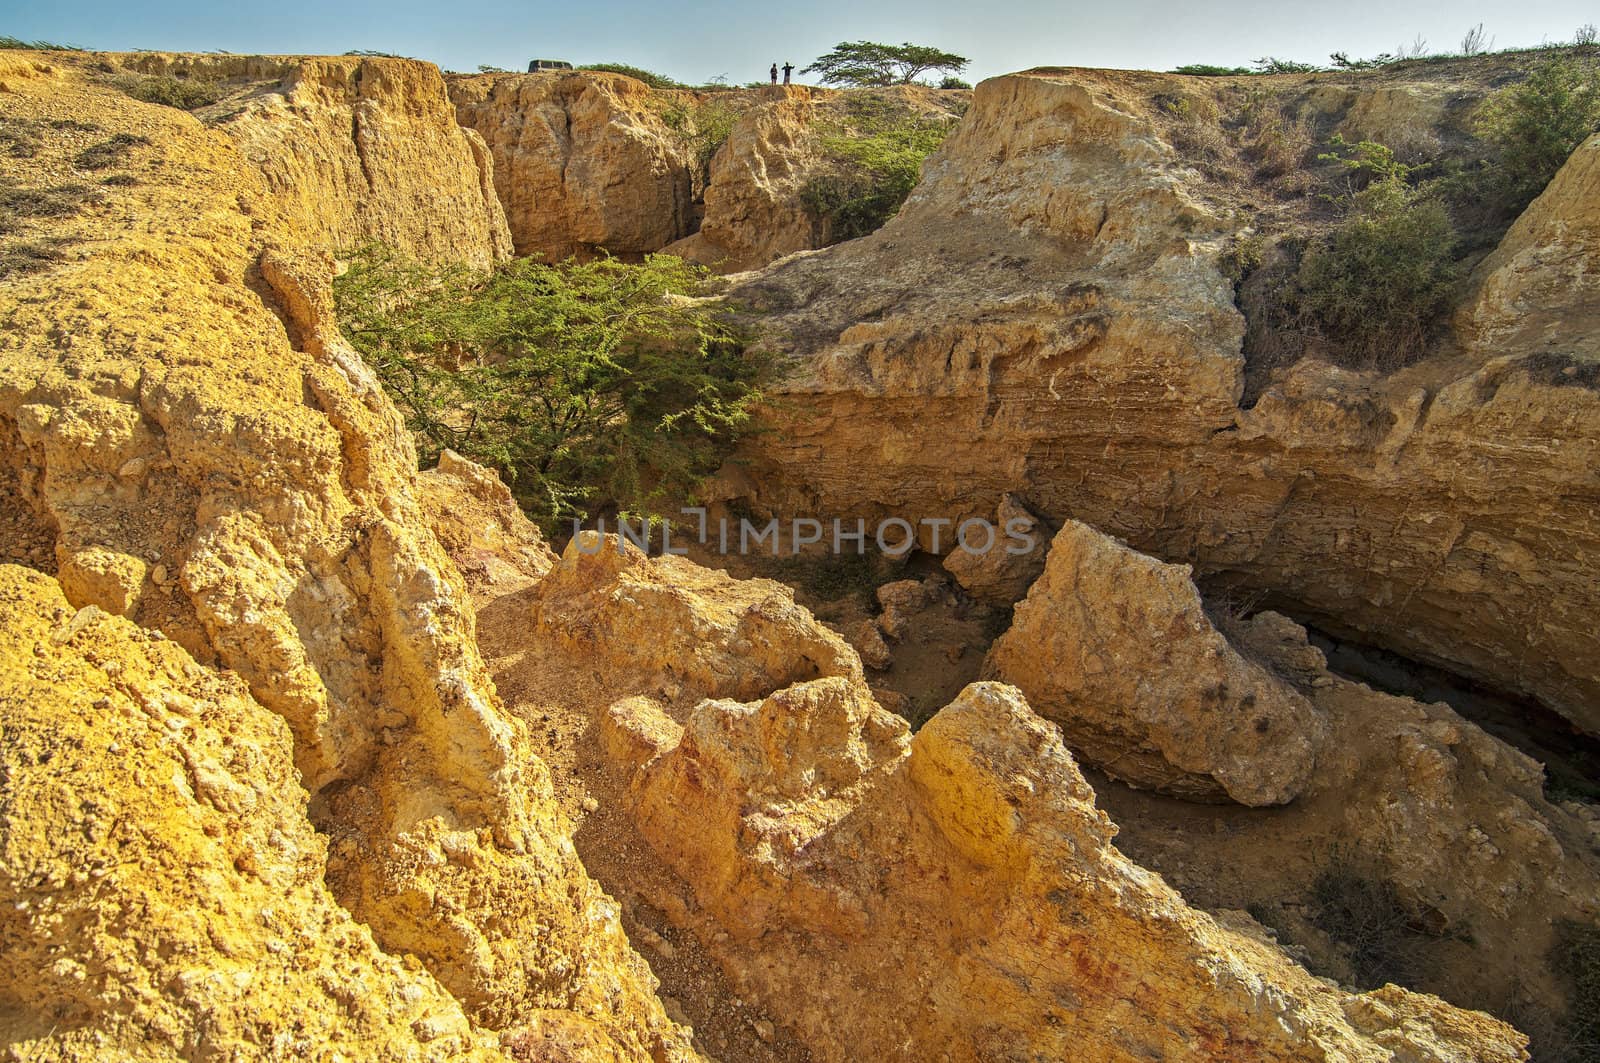 Looking out of a canyon in La Guajira, Colombia.